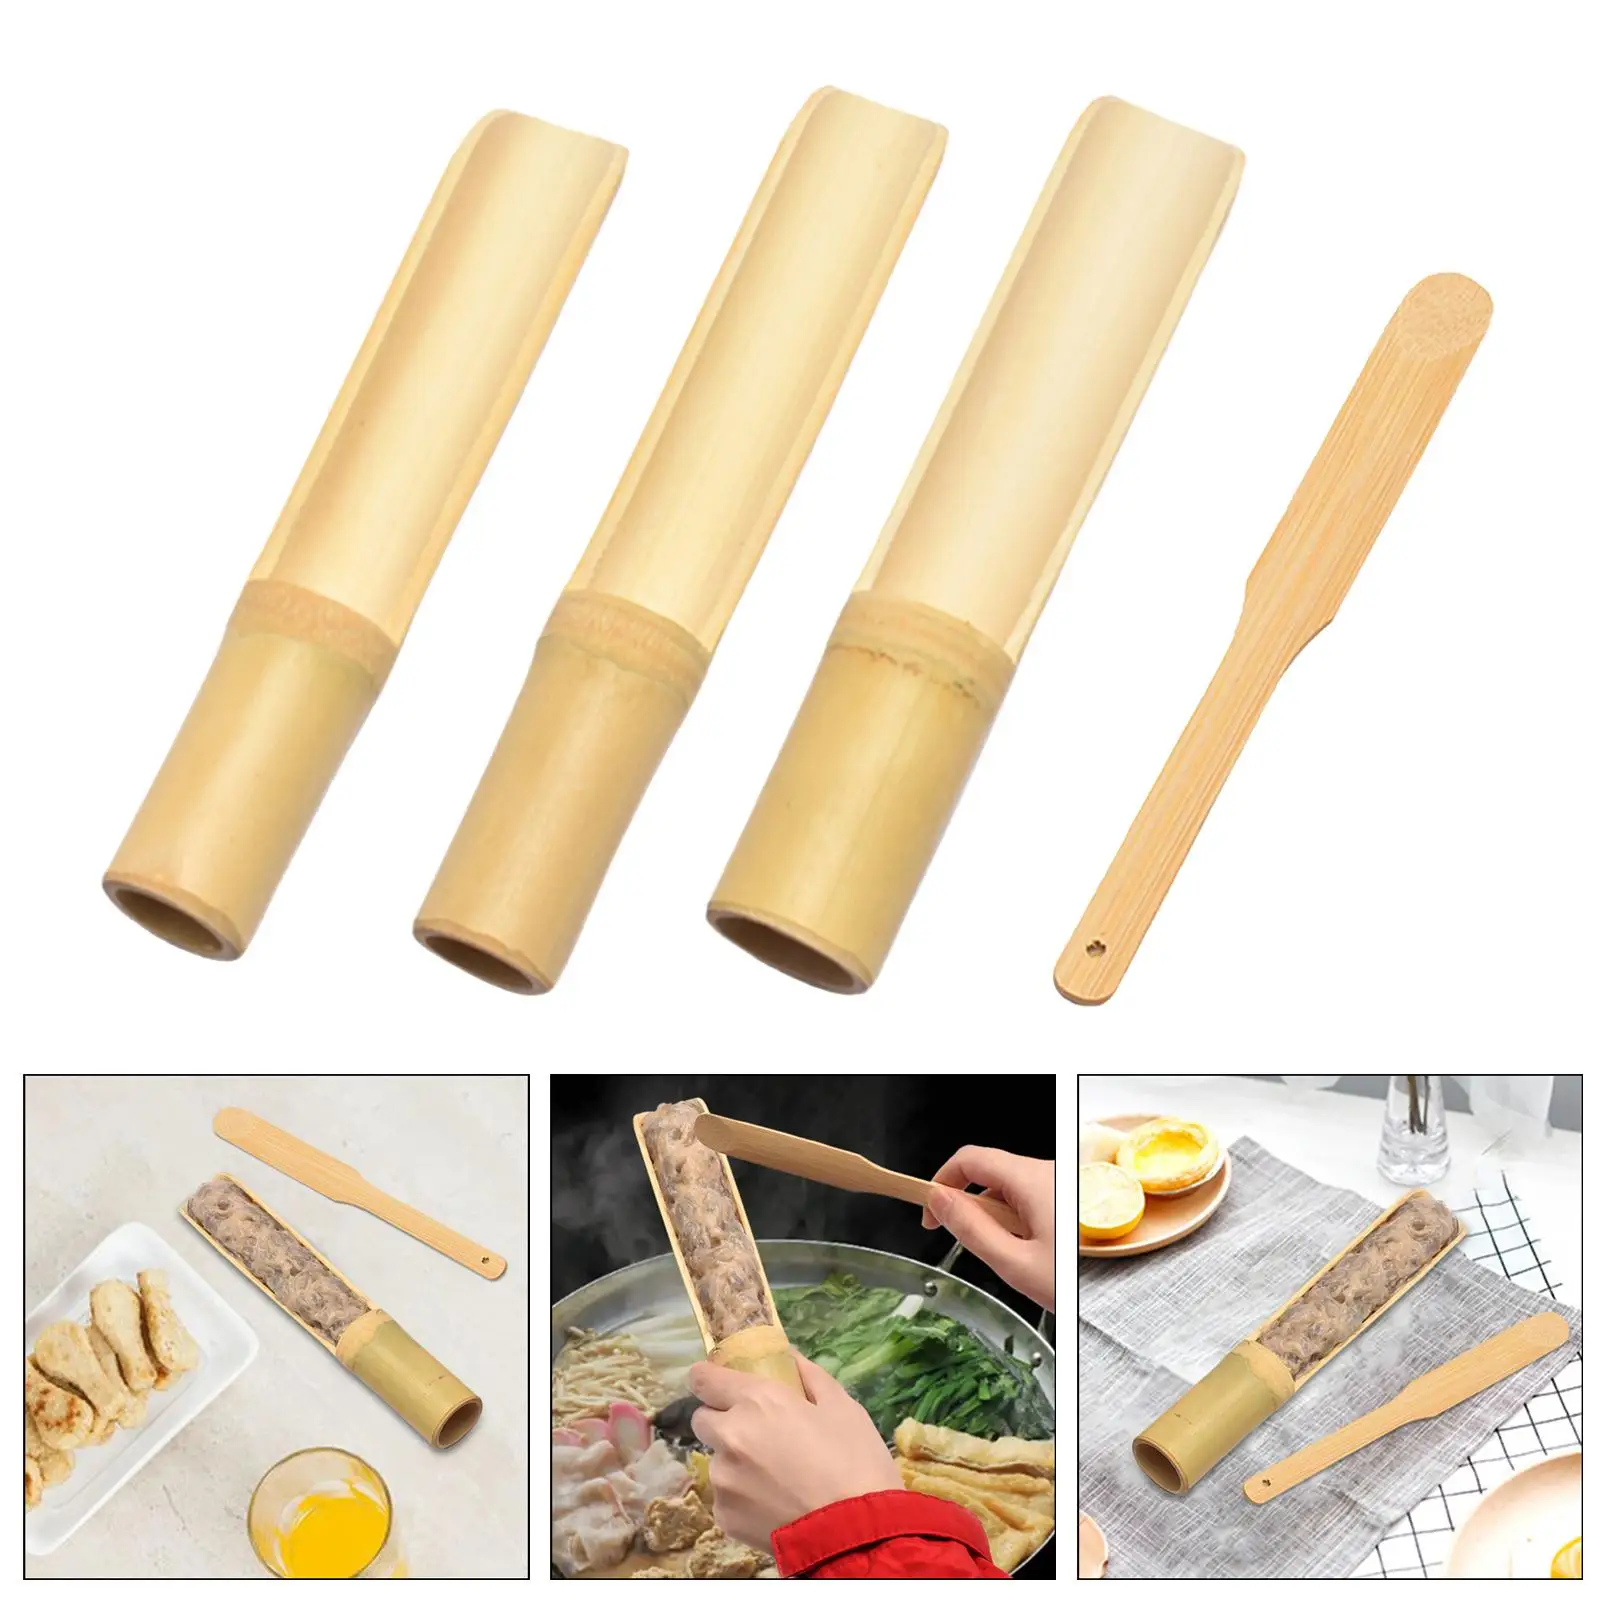 Bamboo Meat Ball Maker Accs Convenient Multipurpose Spoon Utensils Gadgets for Home